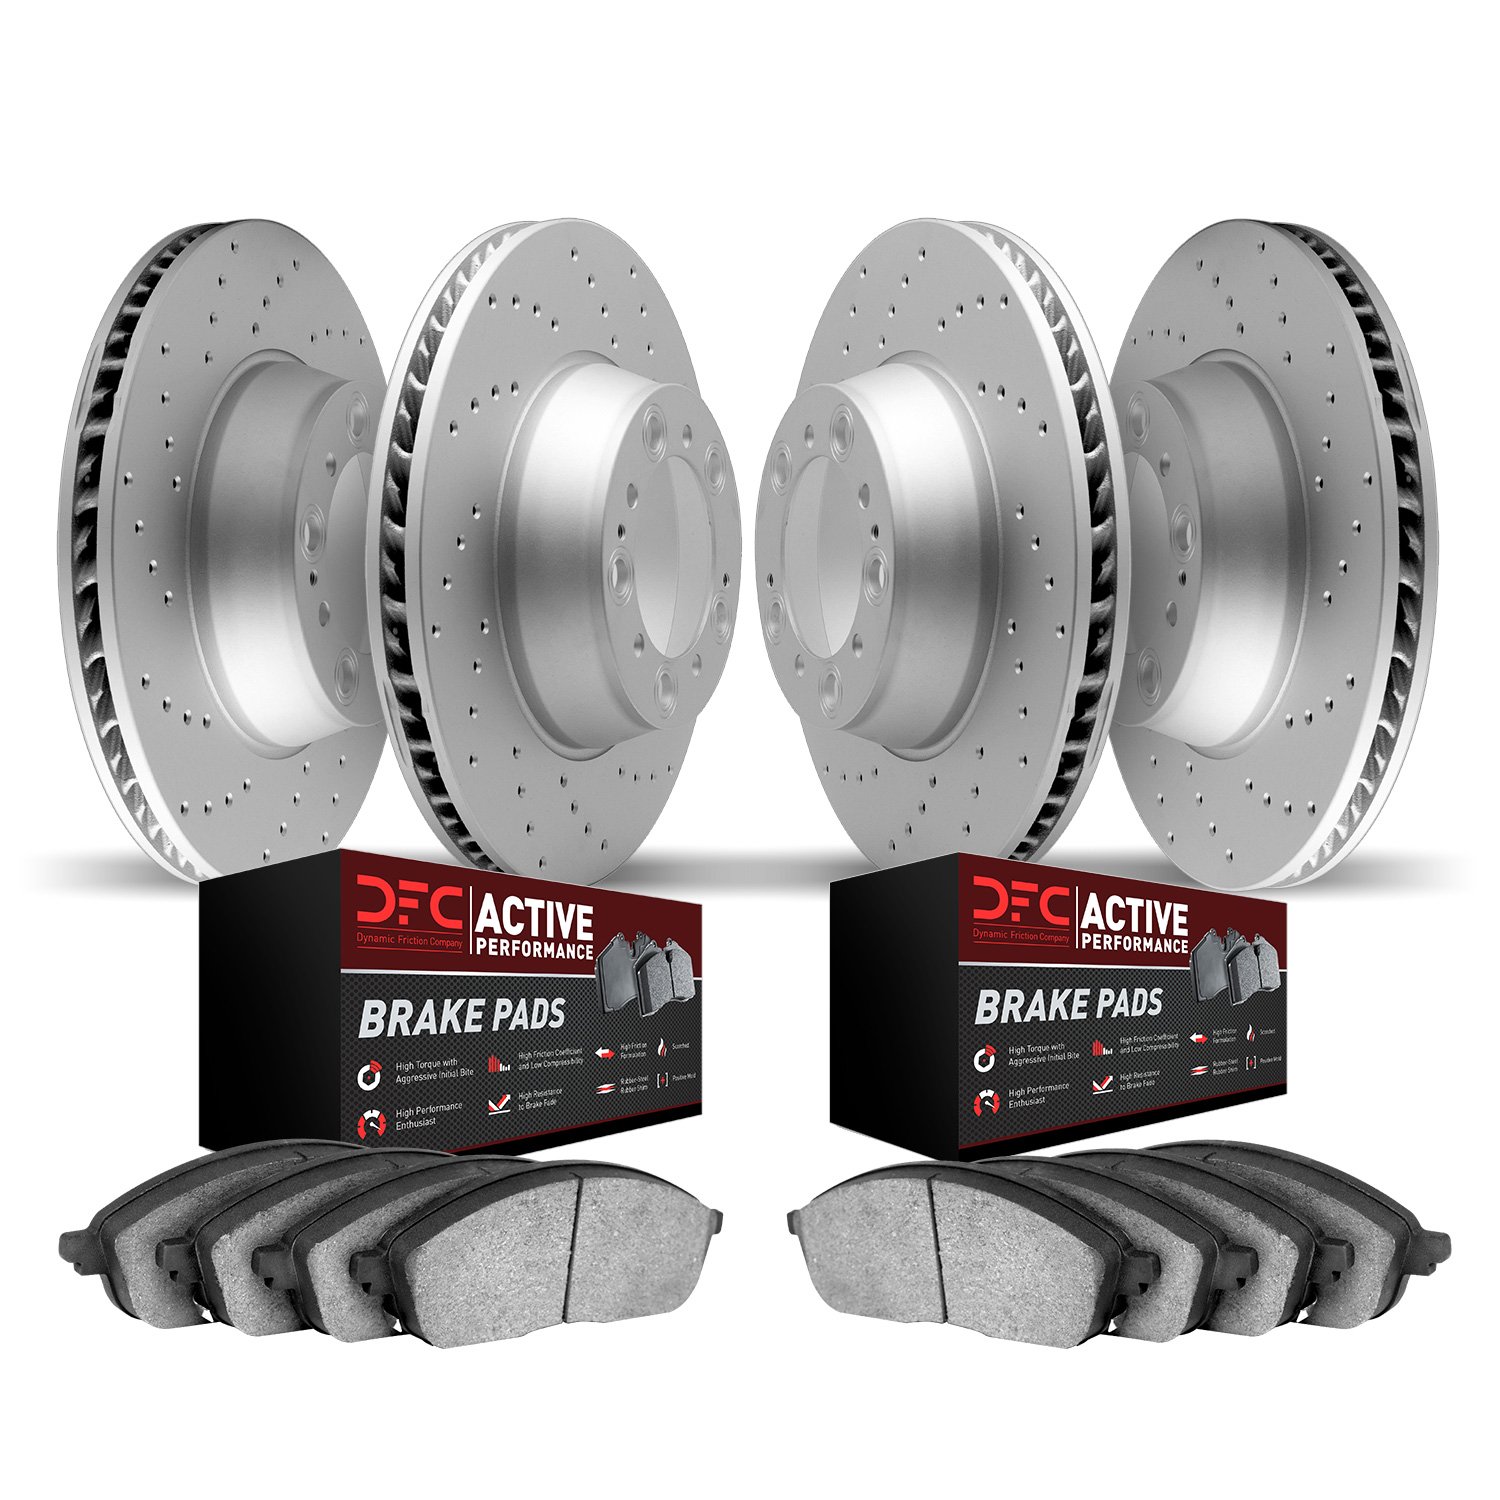 2704-31109 Geoperformance Drilled Brake Rotors with Active Performance Pads Kit, 2012-2016 BMW, Position: Front and Rear